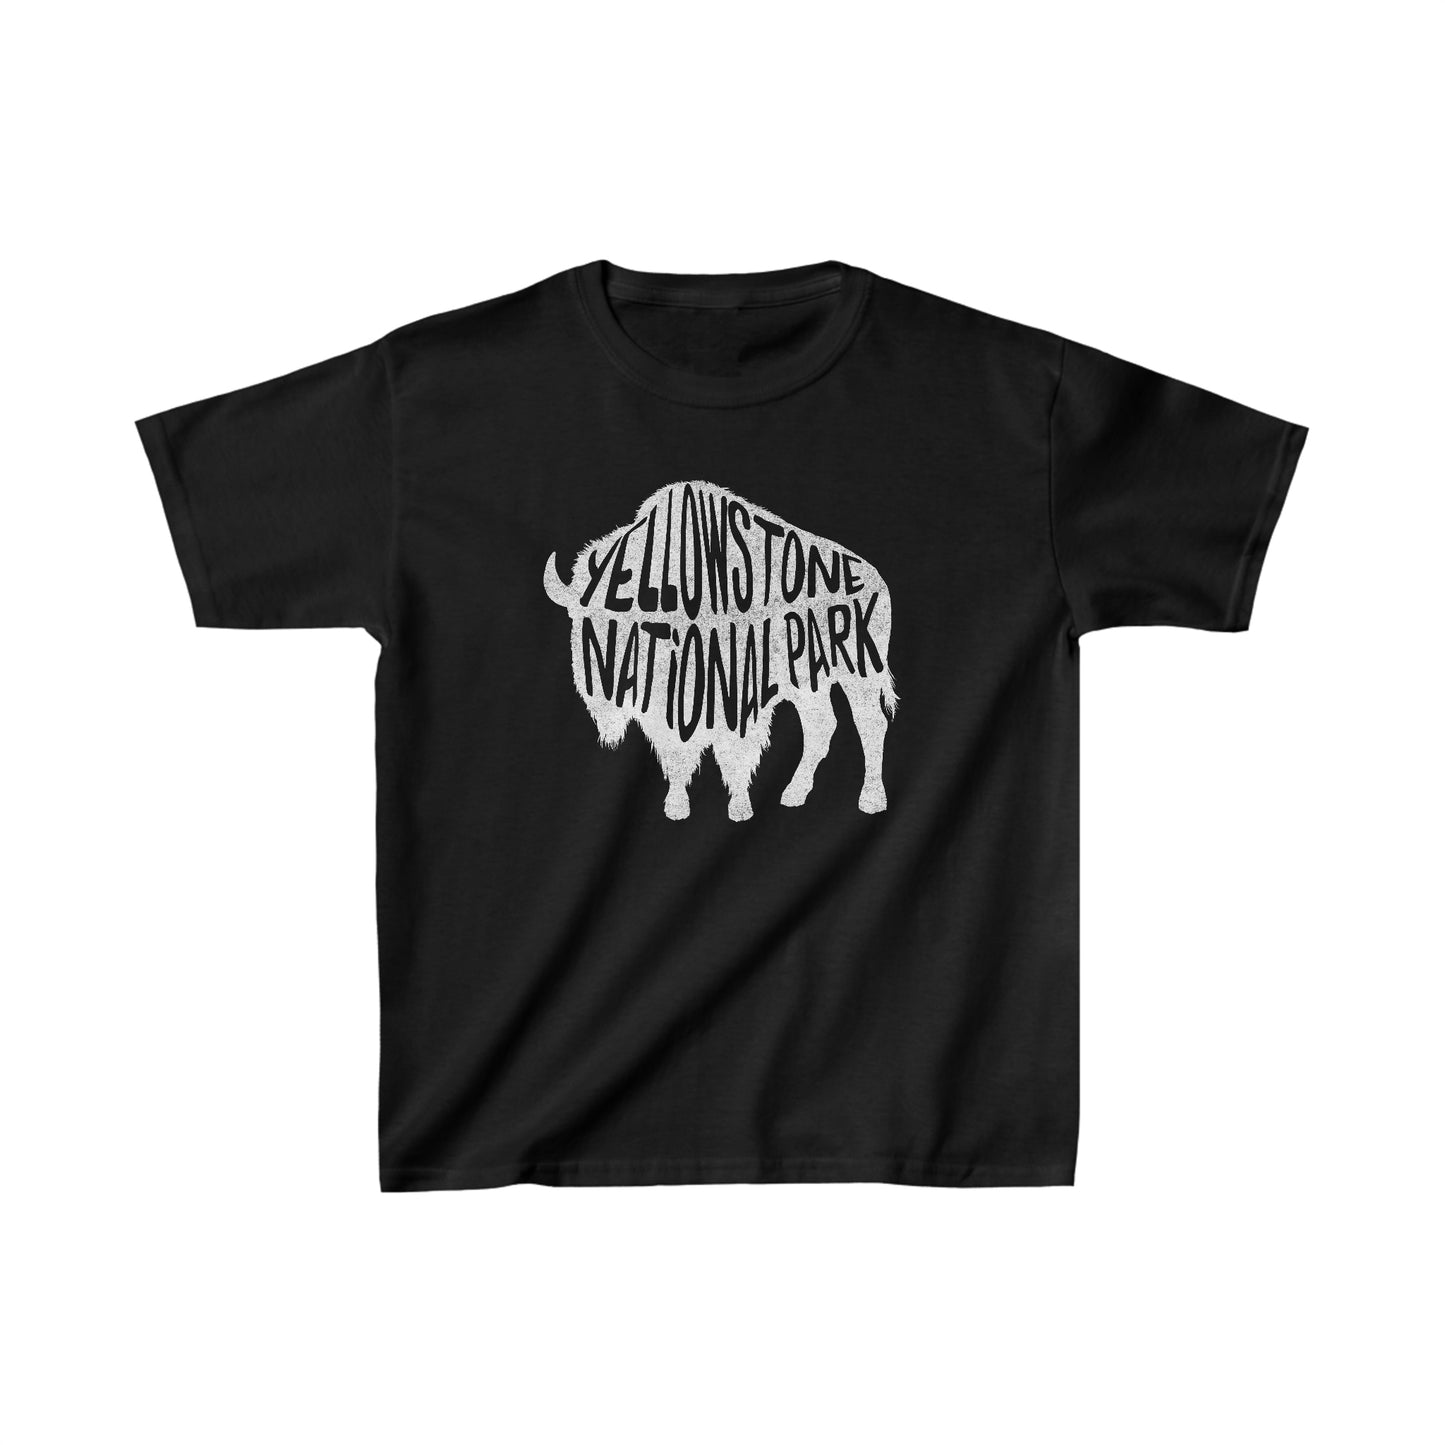 Yellowstone National Park Child T-Shirt - Bison Chunky Text